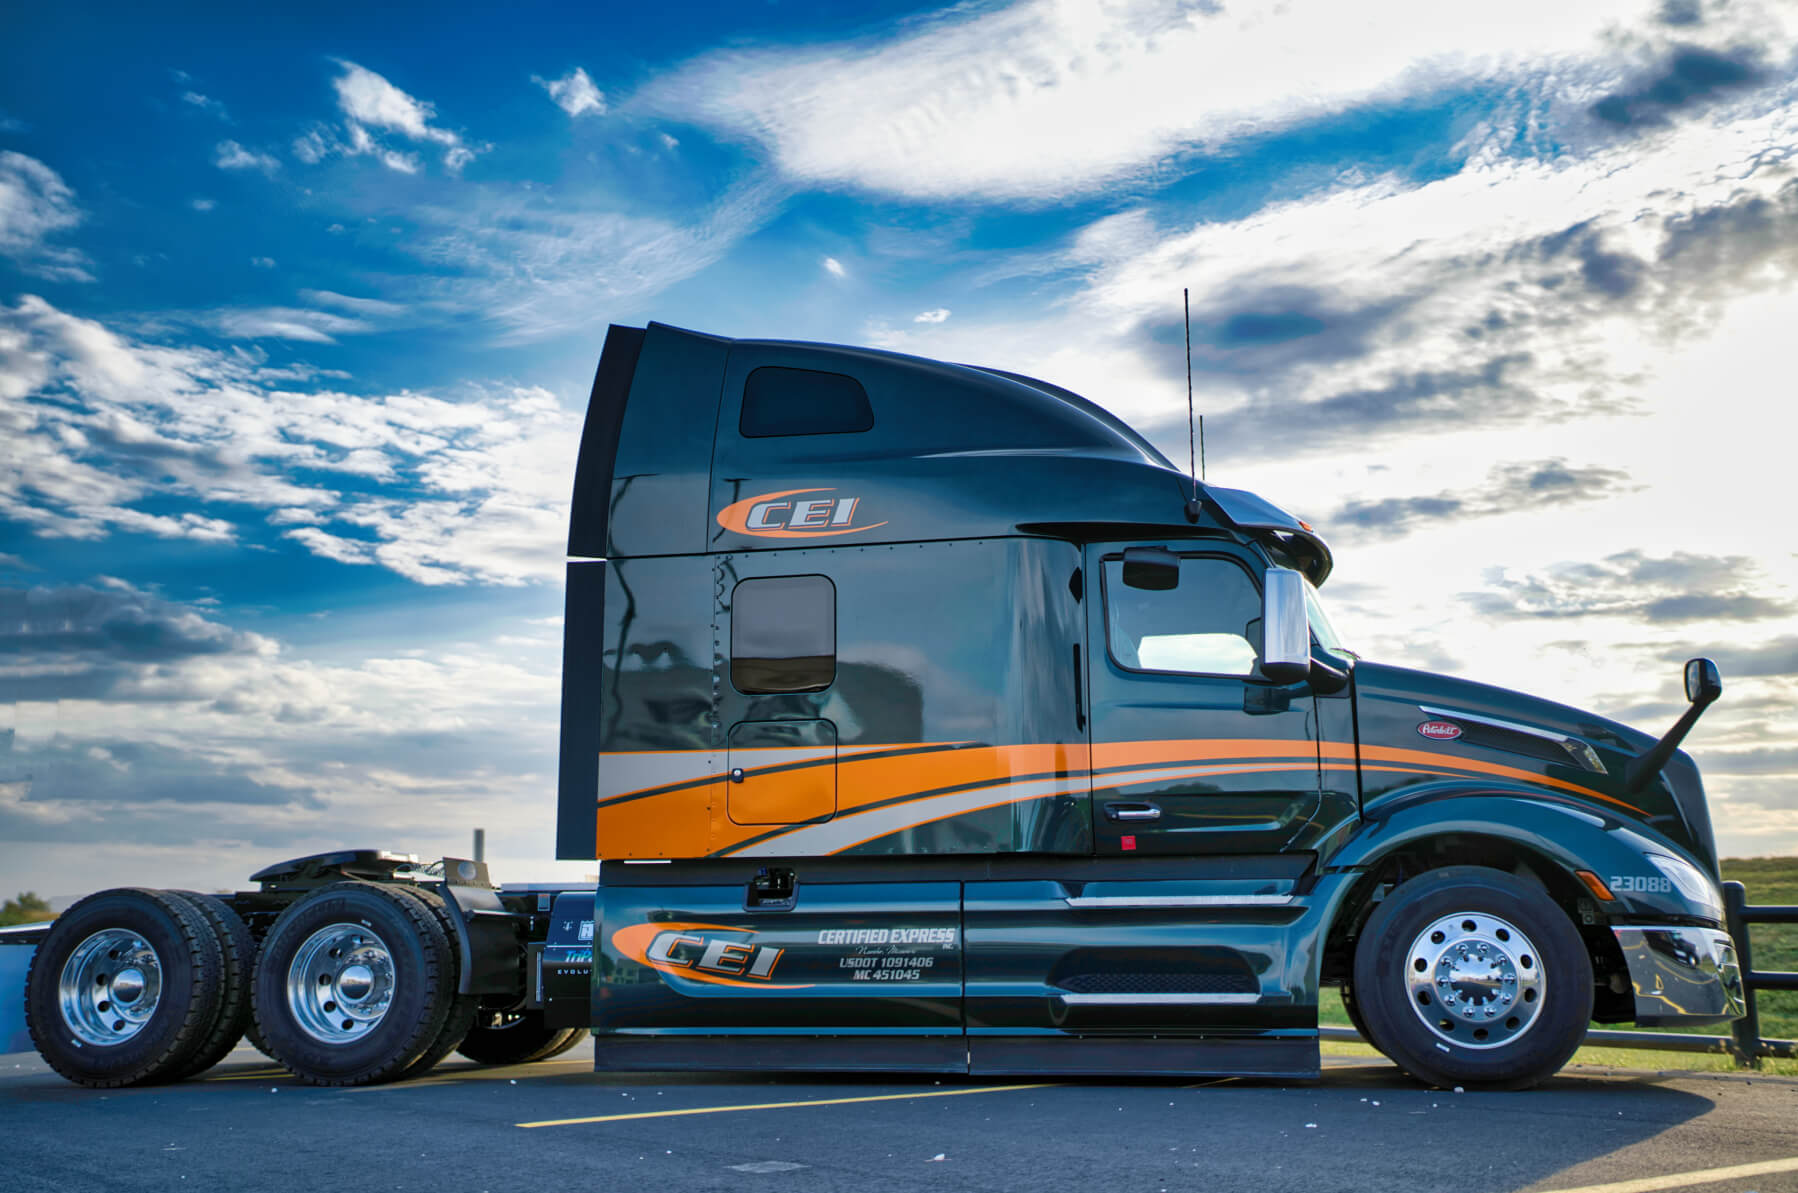 A gleaming black CEI truck with an orange stripe shown in profile against a clear blue sky.